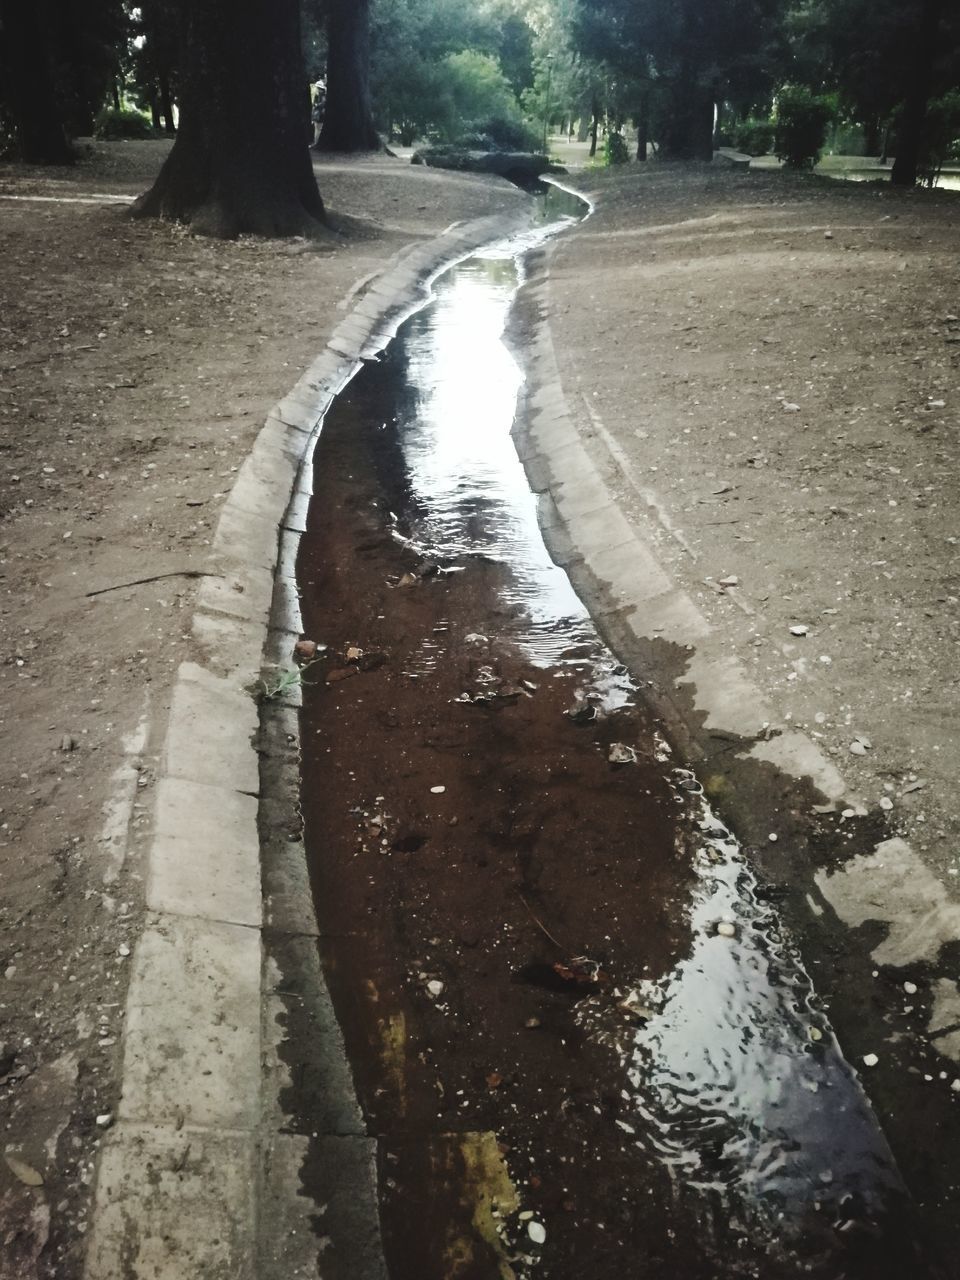 REFLECTION OF TREES ON WET ROAD